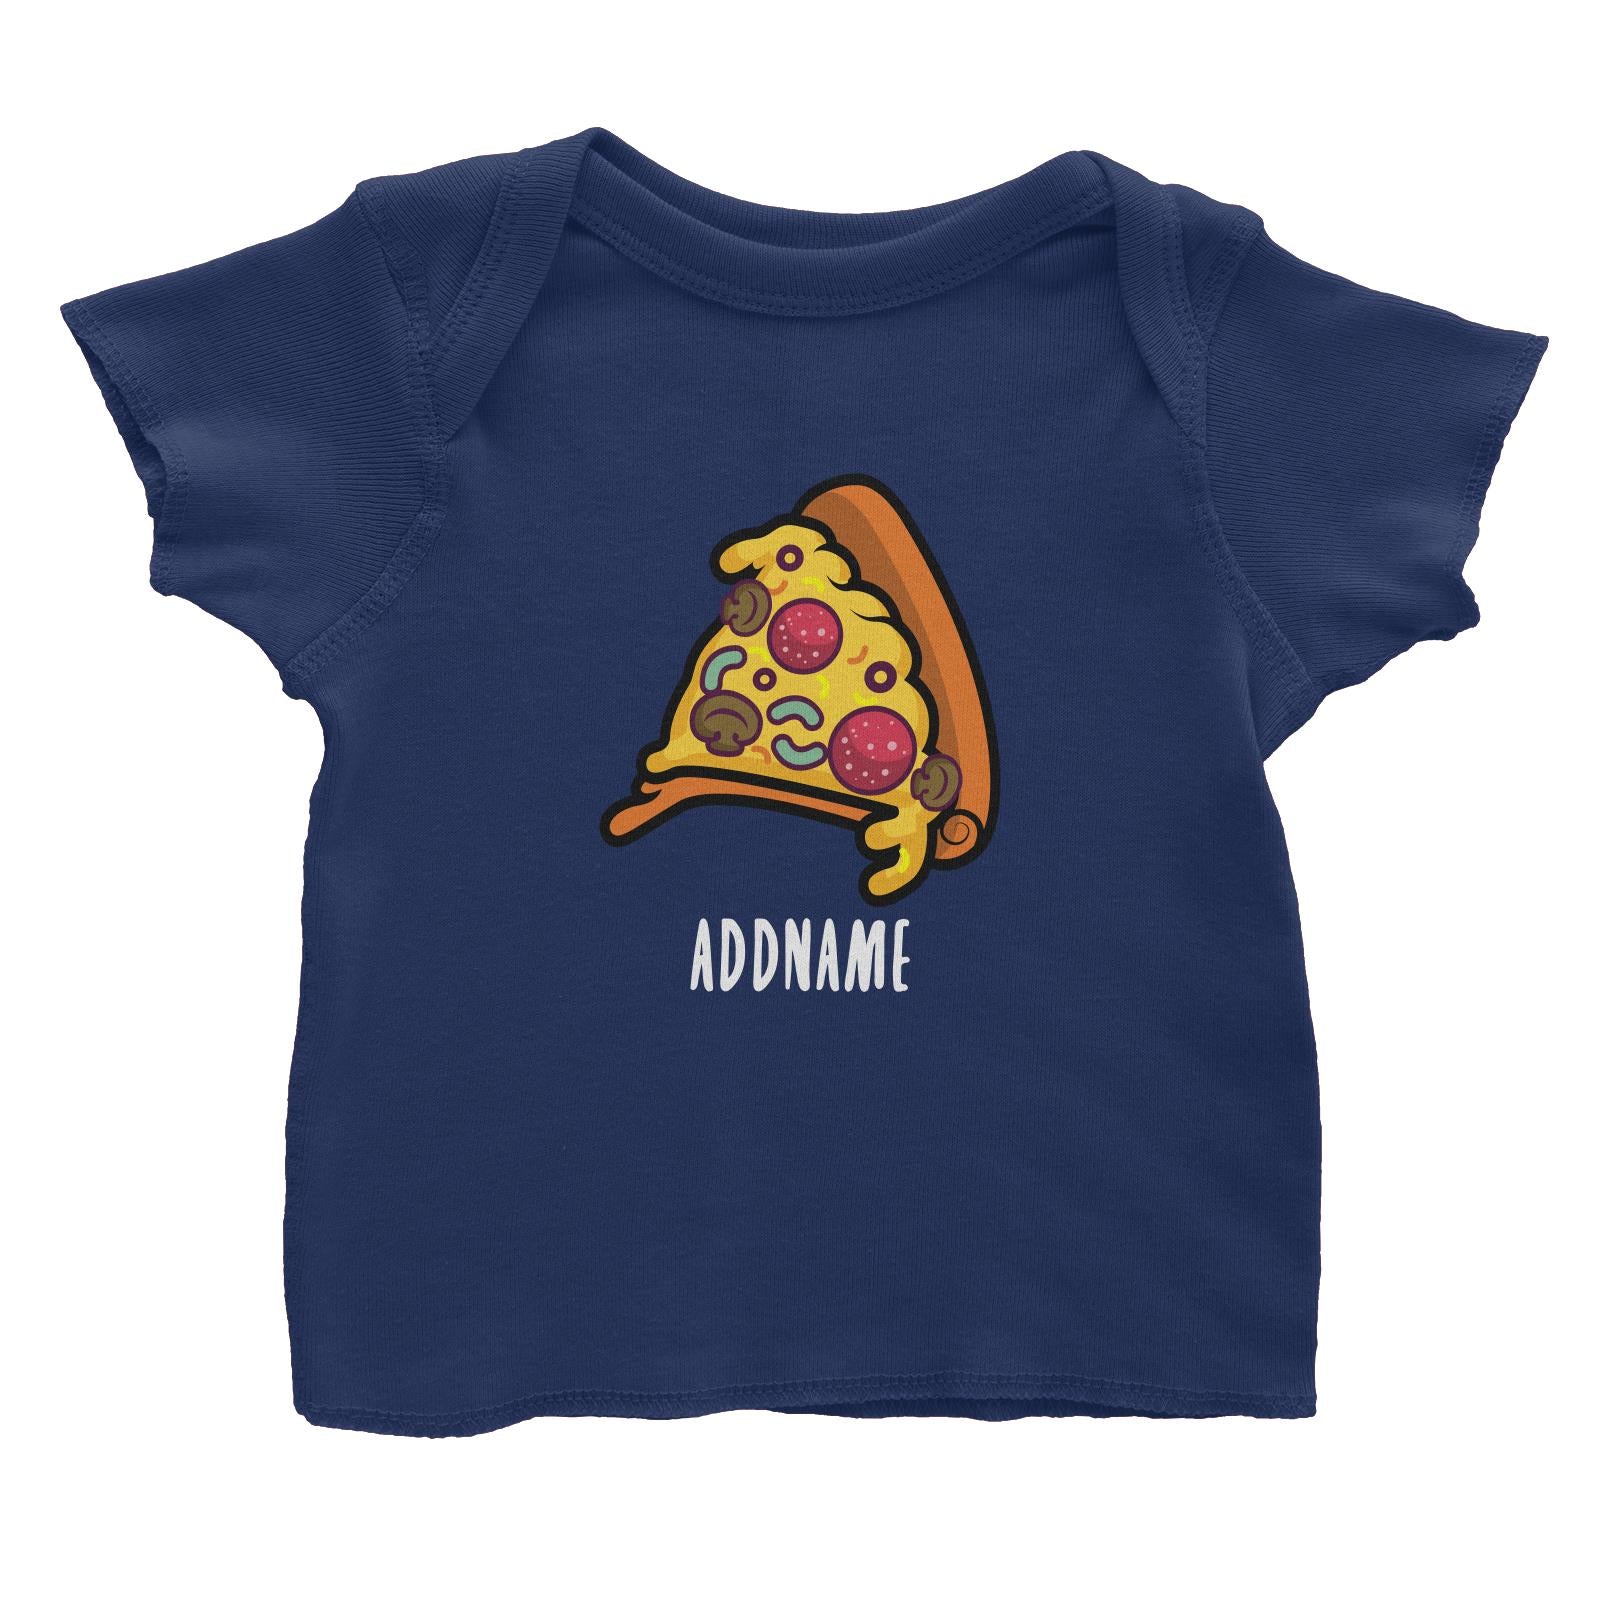 Fast Food Pizza Slice Addname Baby T-Shirt  Matching Family Comic Cartoon Personalizable Designs